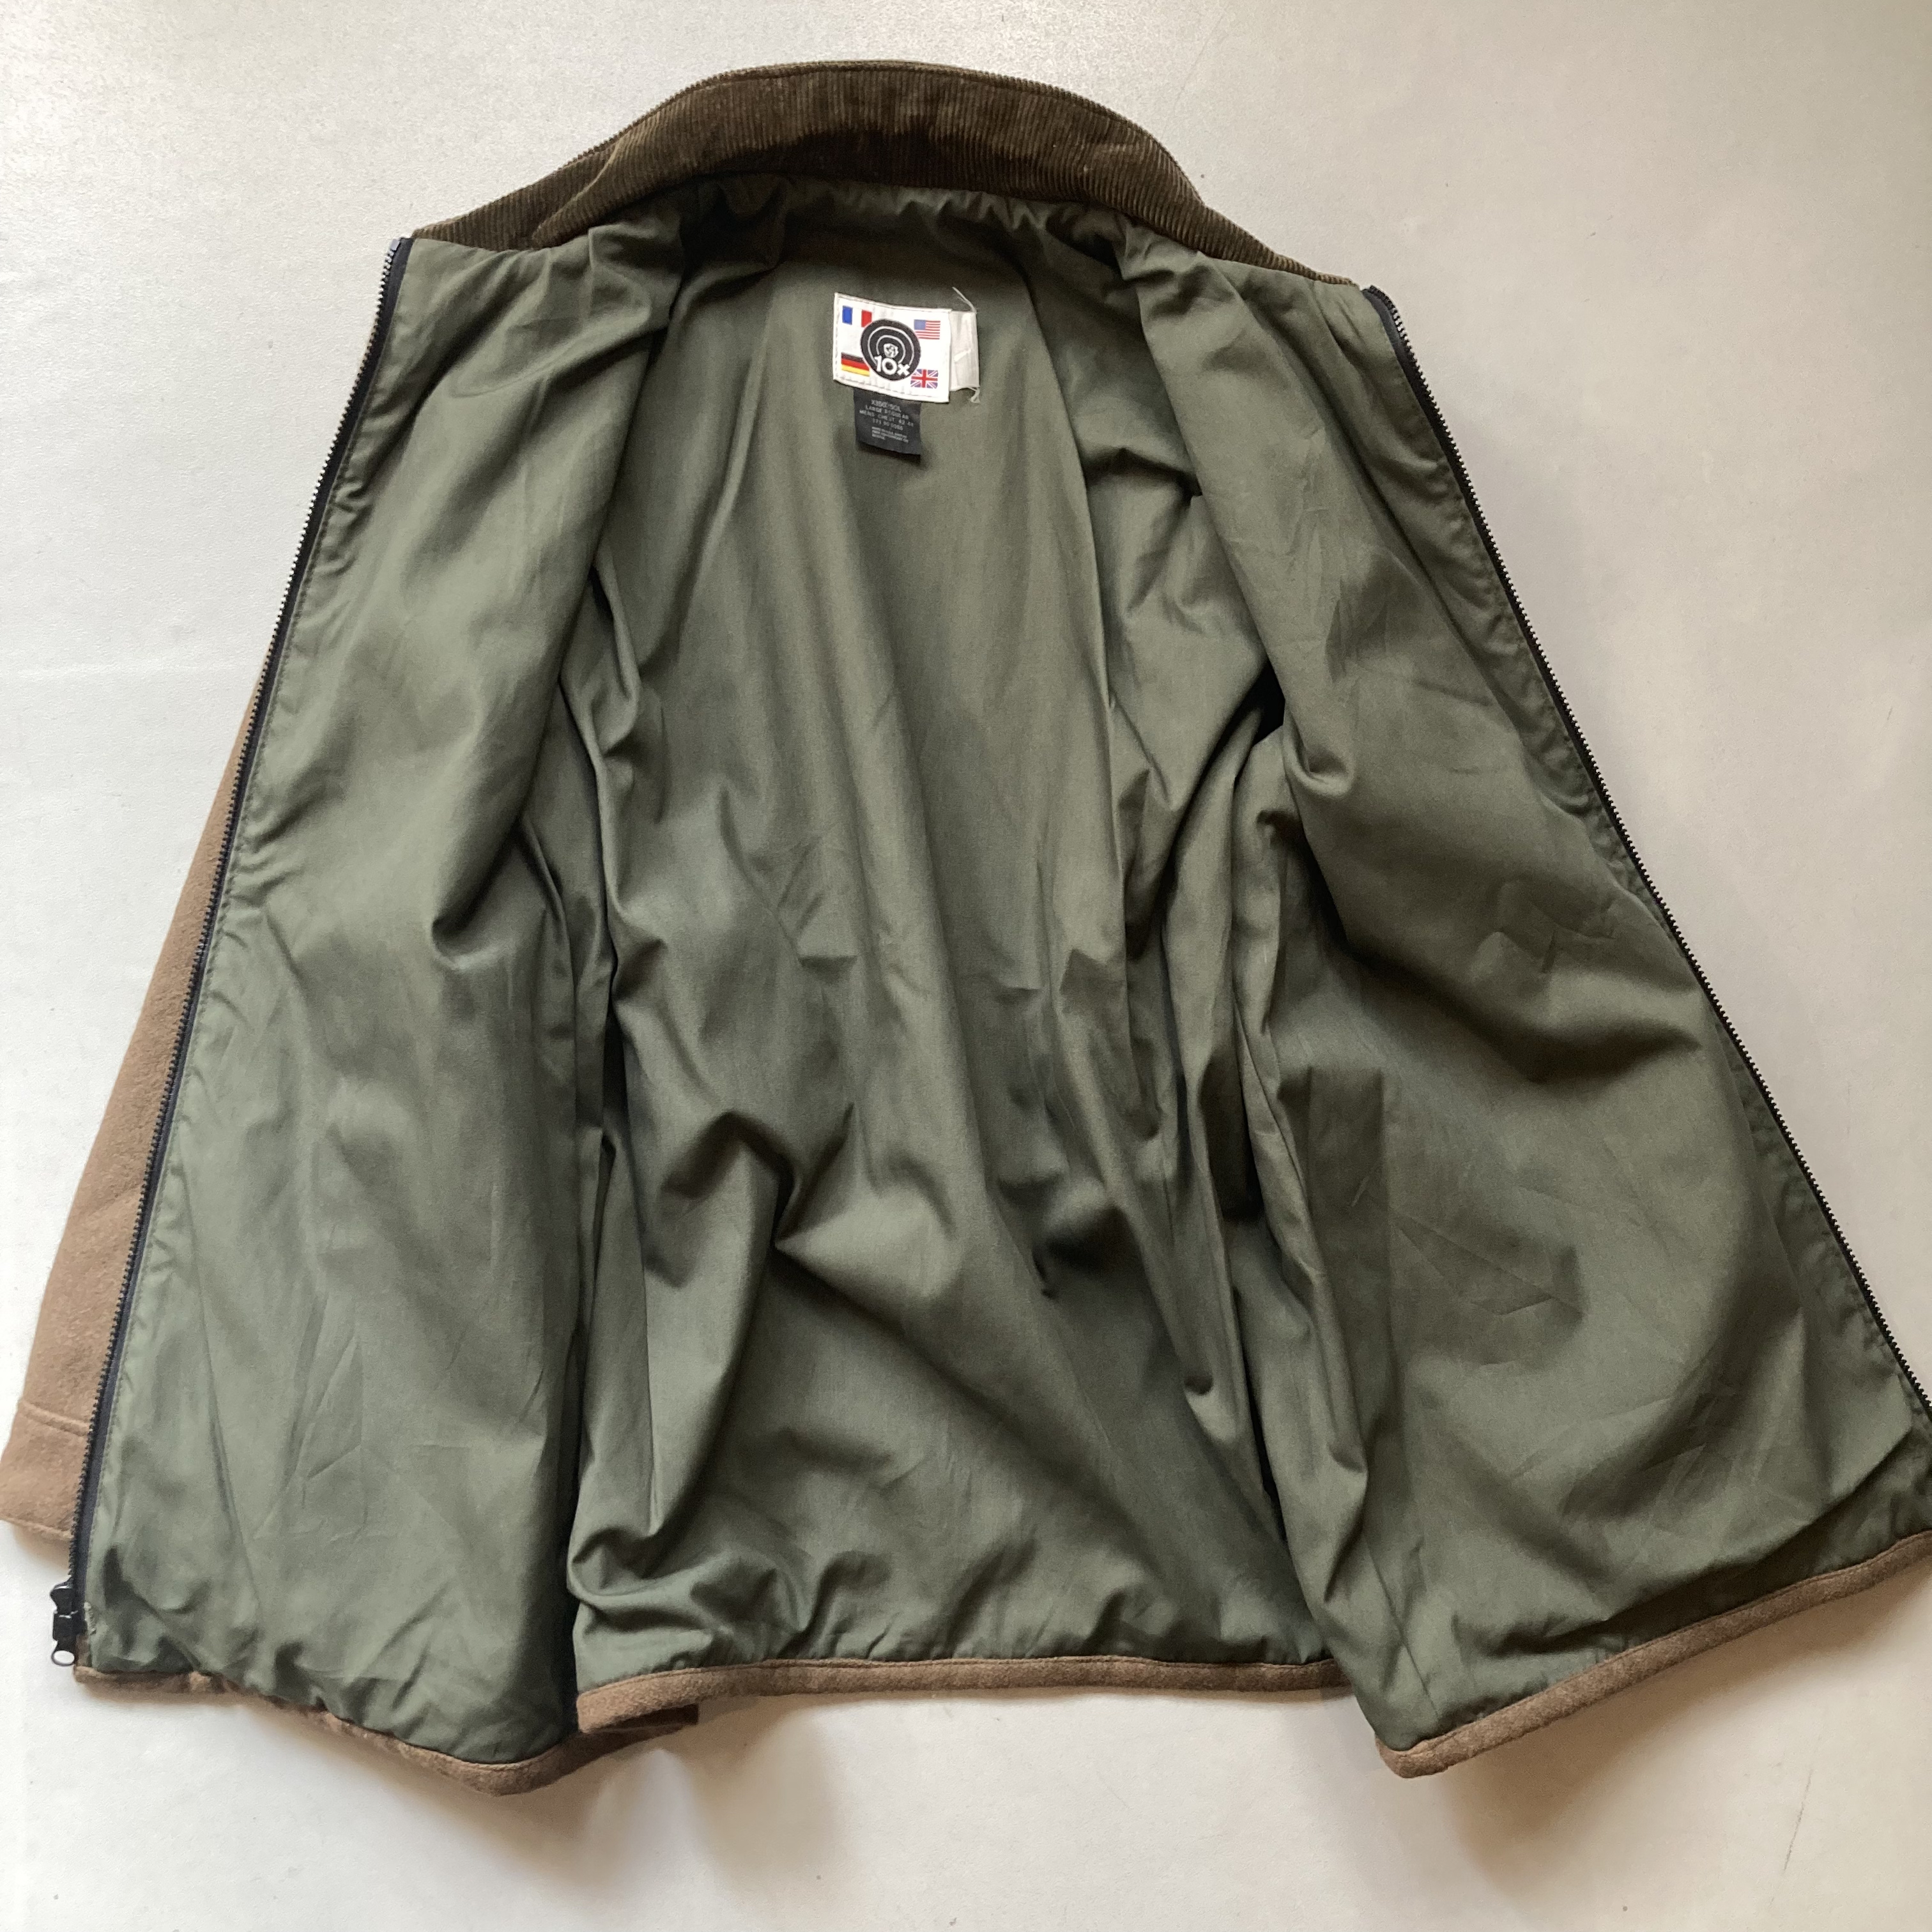 80s-90s 10x hunting jacket from USA